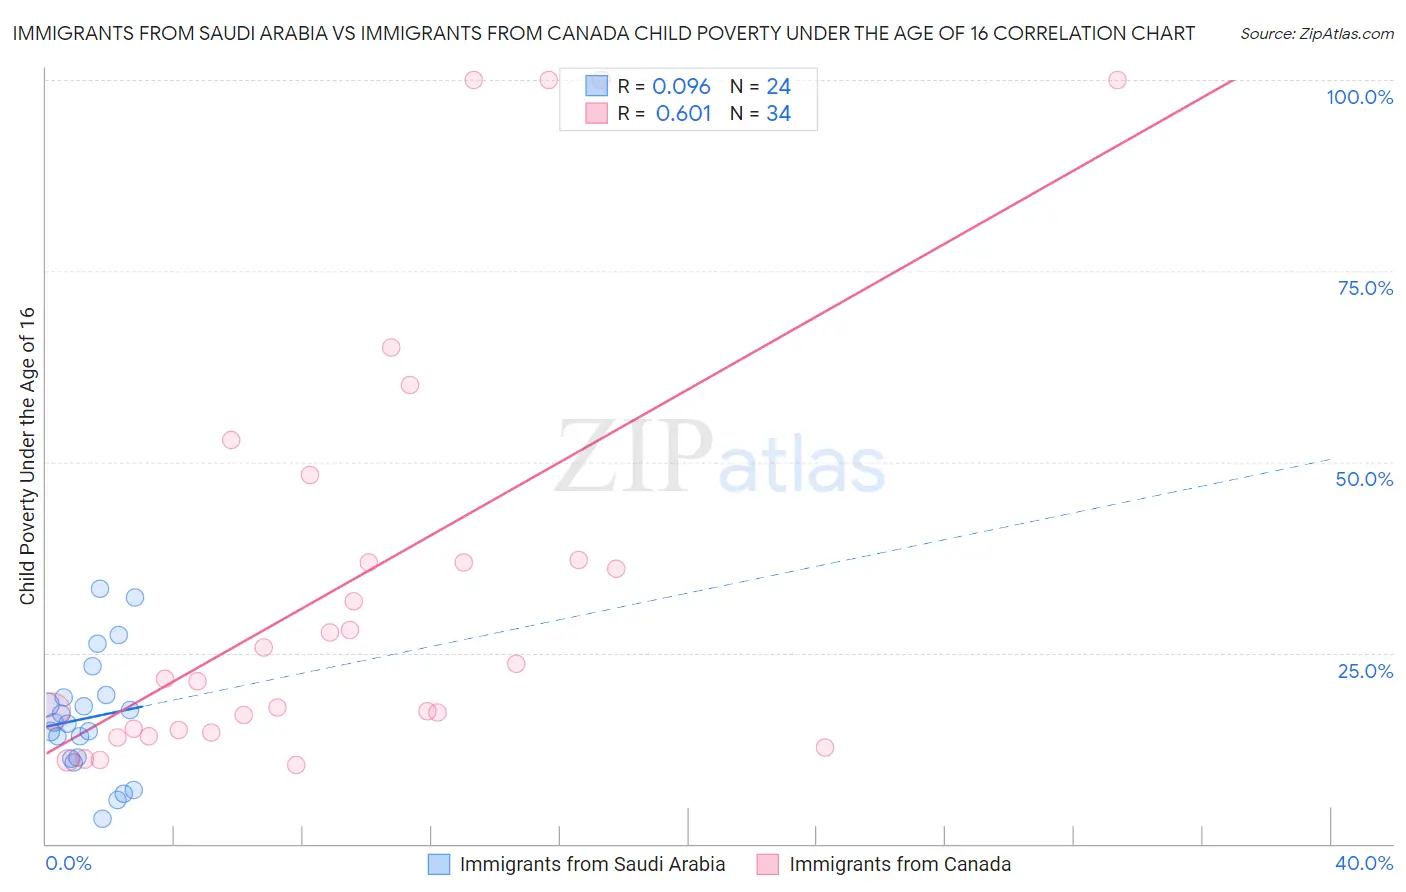 Immigrants from Saudi Arabia vs Immigrants from Canada Child Poverty Under the Age of 16